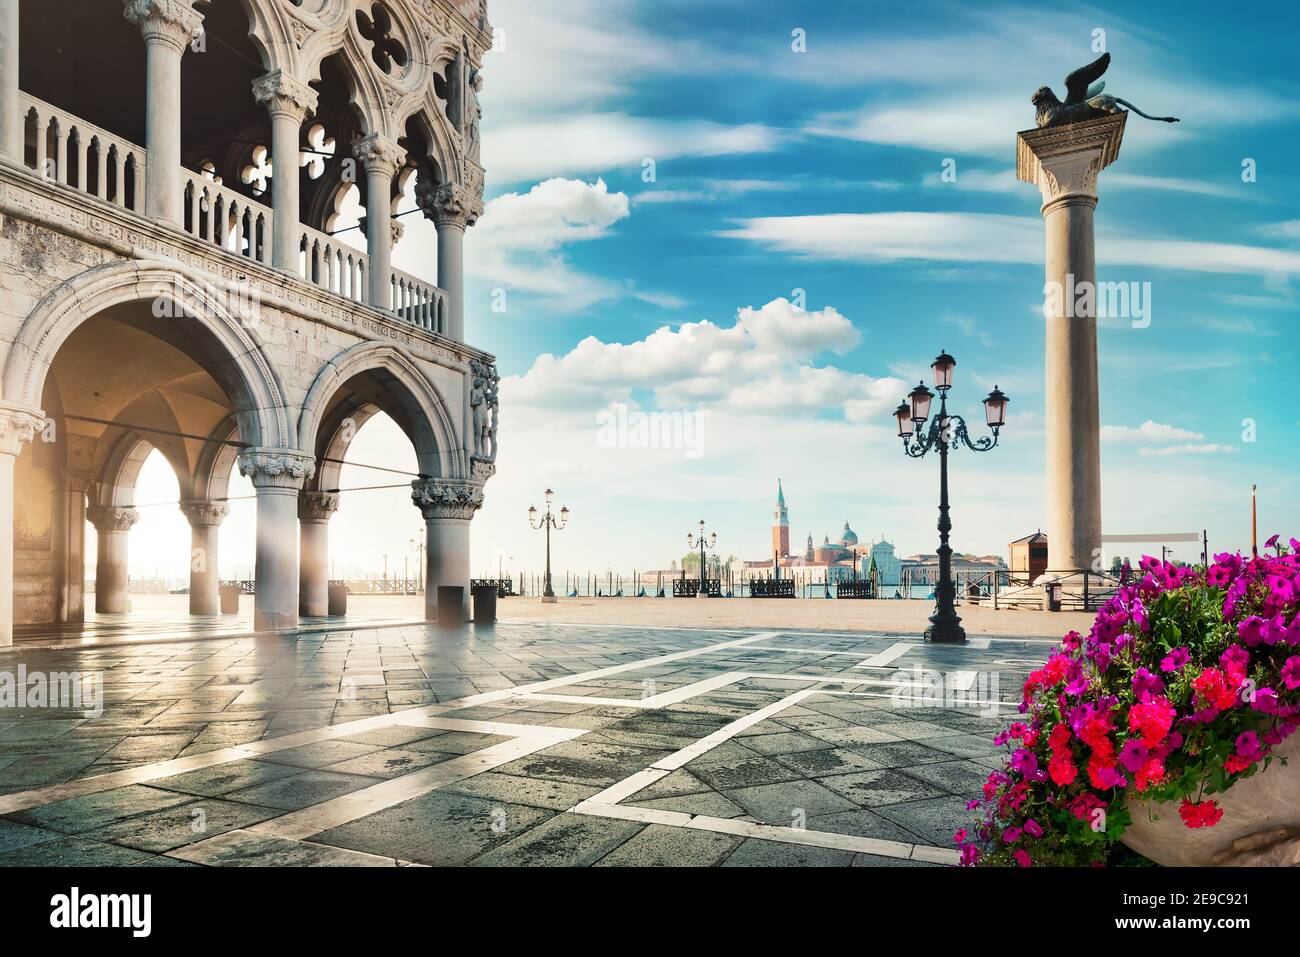 Early morning over San Marco square in Venice, Italy. Stock Photo